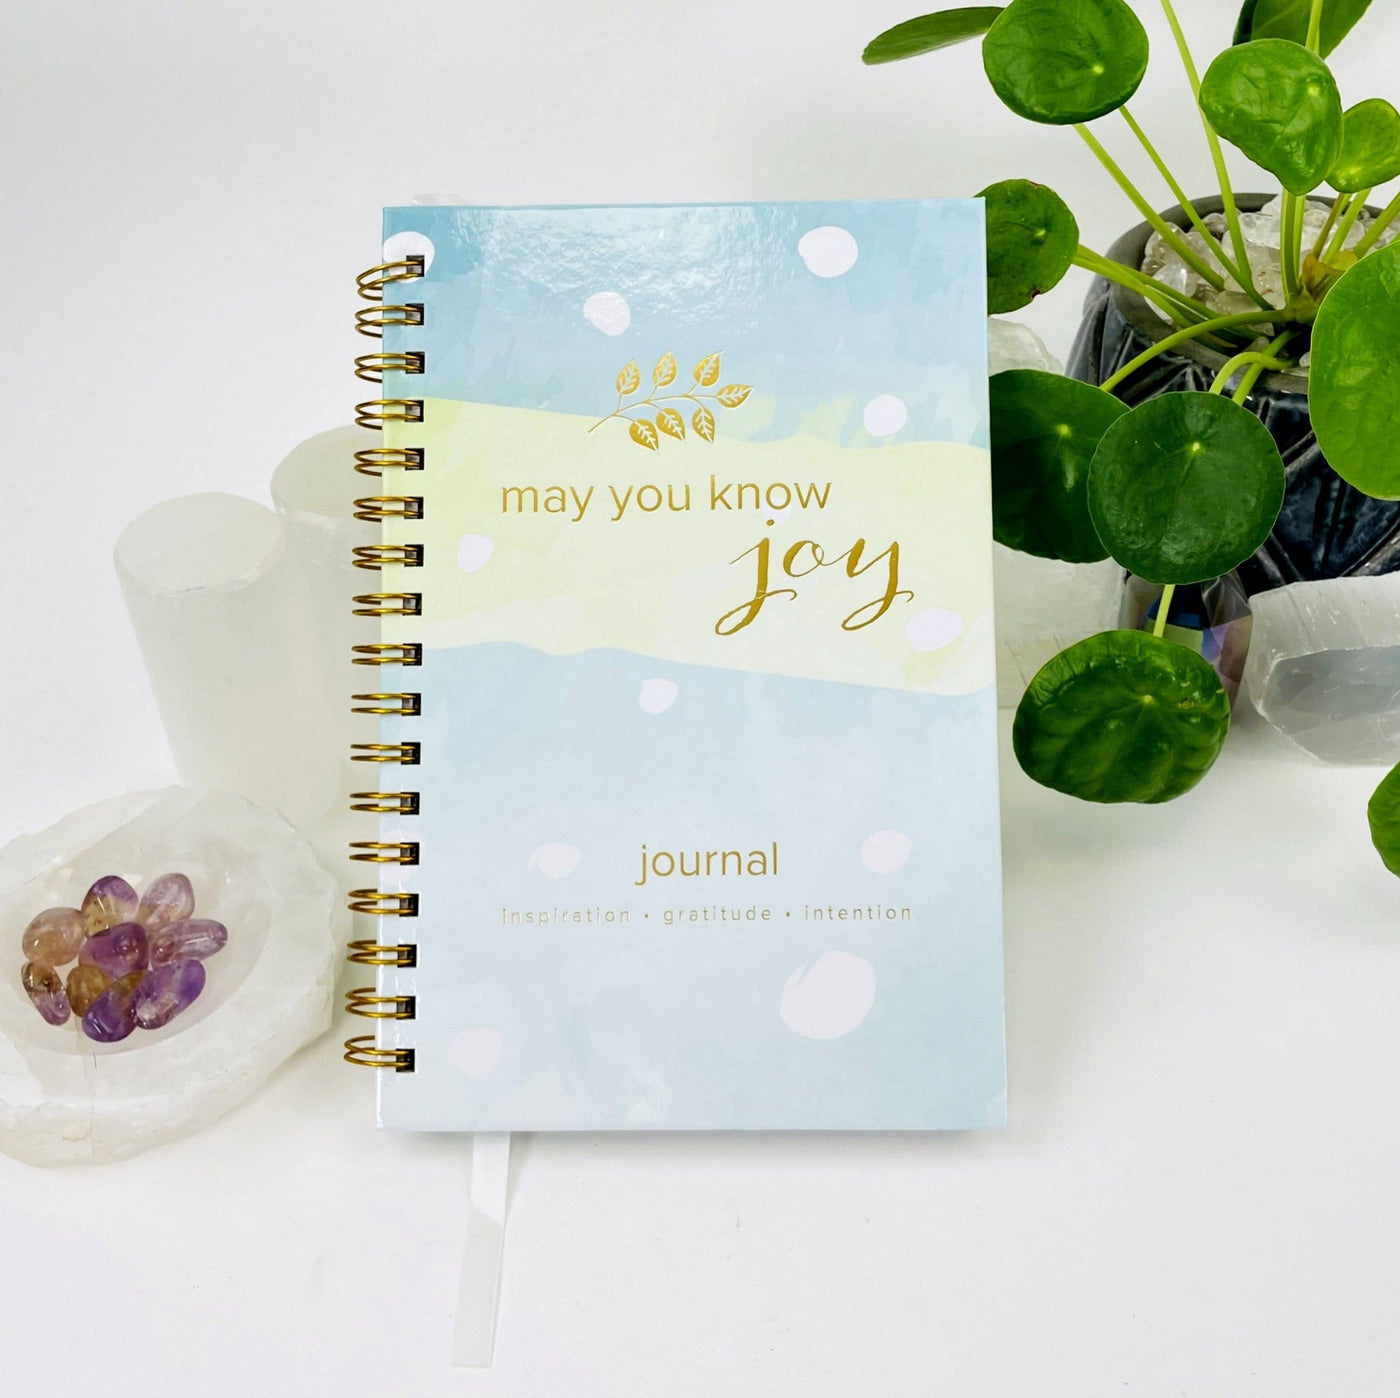 Journal - May You Know Joy with decorations in the background